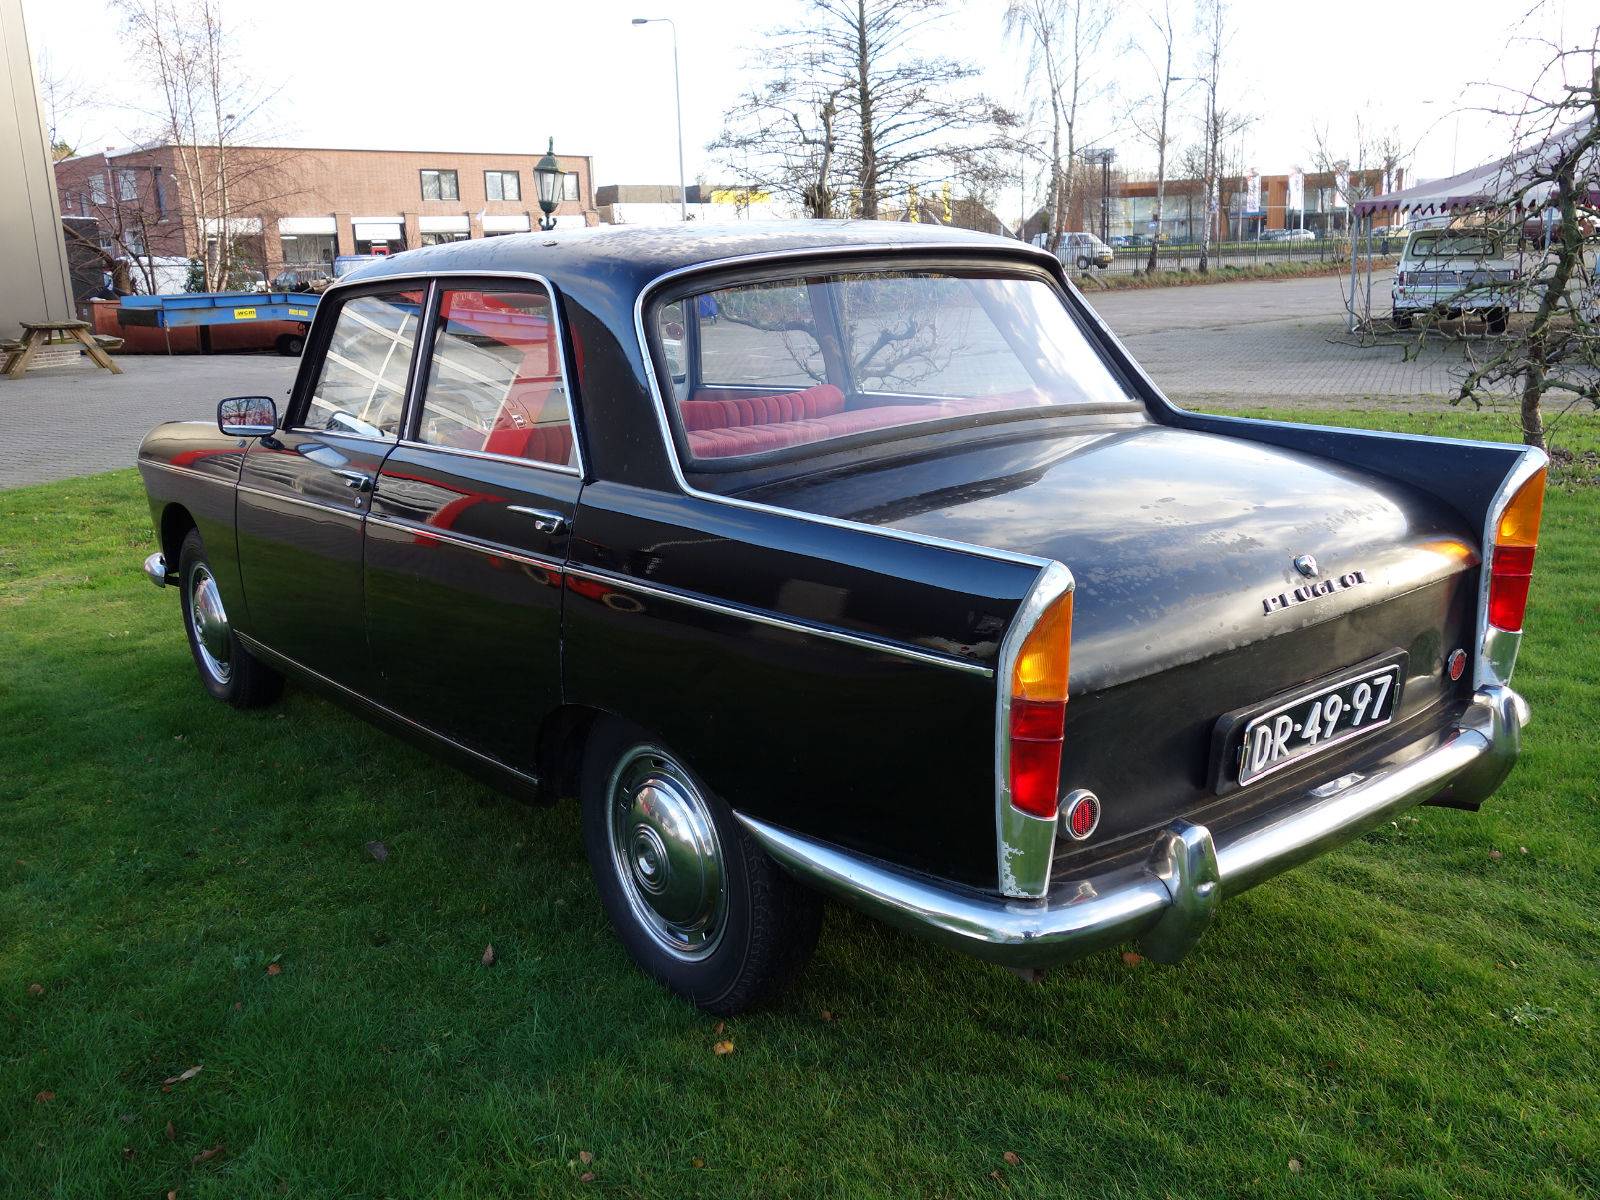 For Sale Peugeot 404 (1962) offered for AUD 7,498